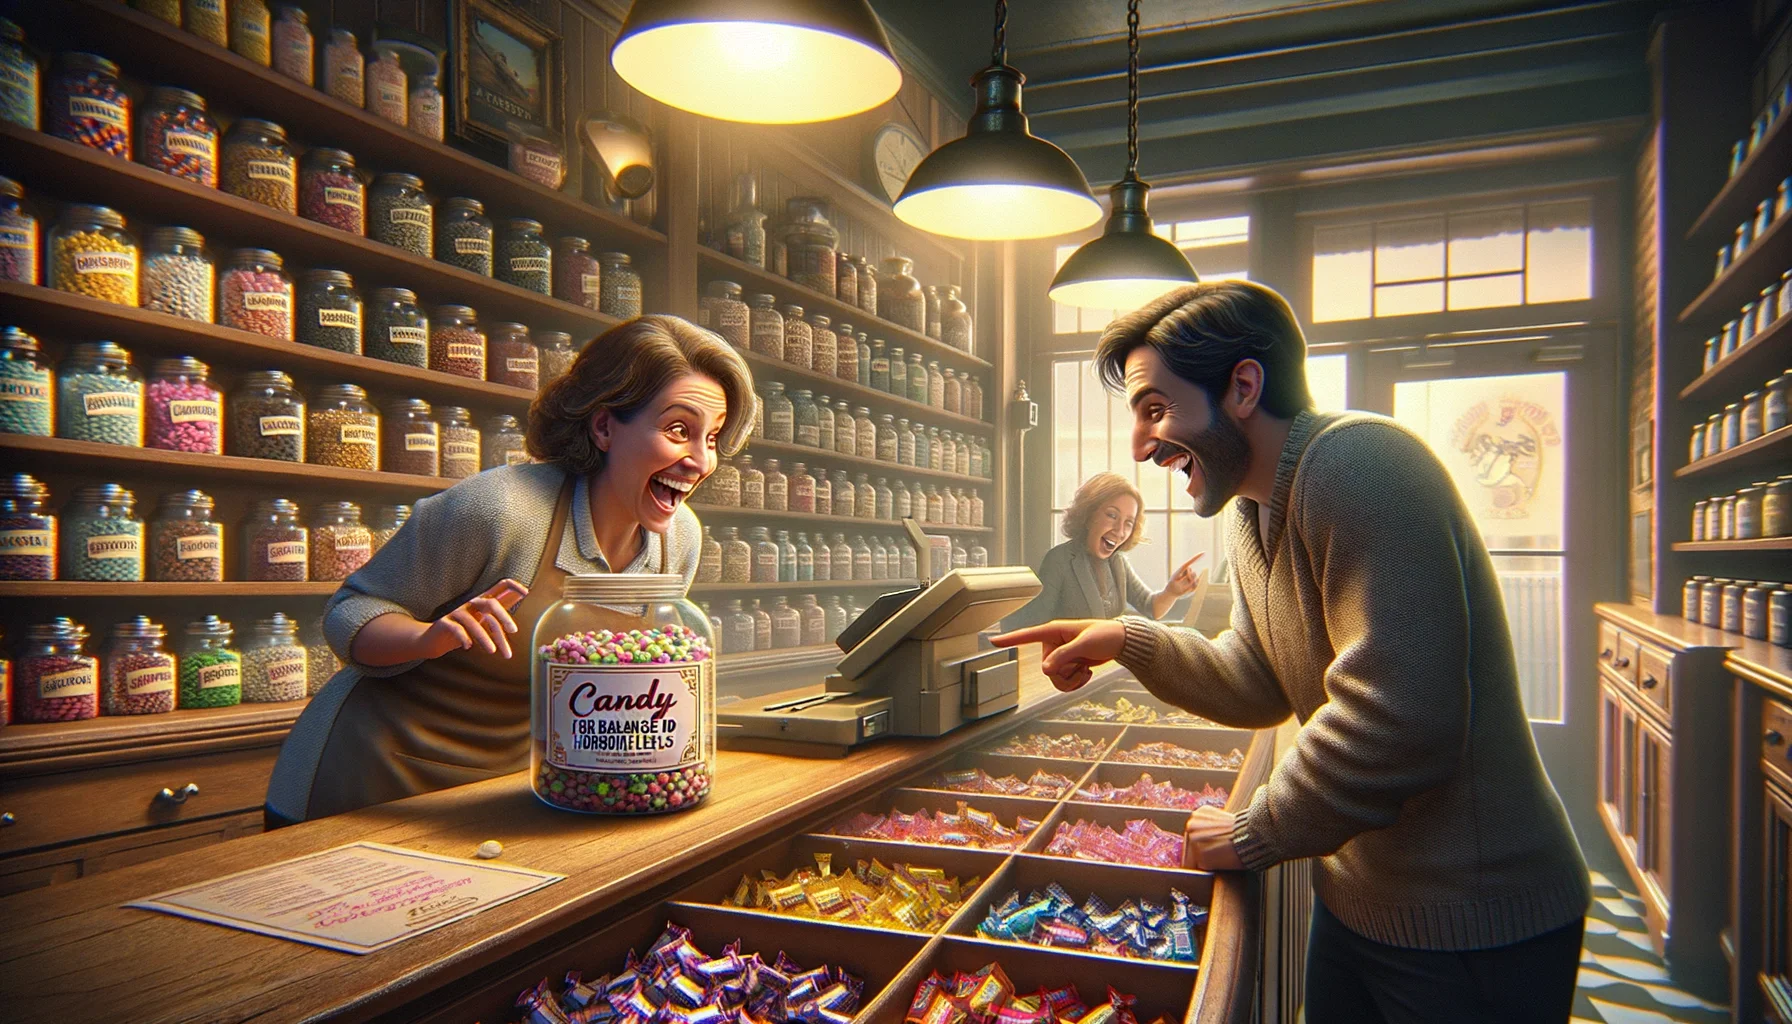 Imagine a humorous and realistic image that highlights a product labeled as 'Candy for Balanced Hormone Levels'. To create the perfect scenario, picture a pair of customers in a candy store. The first customer is a Hispanic male with a look of surprise and interest as he examines the product. The second customer is a Caucasian lady who is laughing and pointing at the candy with a wide grin on her face. Ambient light pleasantly floods the charming old-fashioned store, filled with glass jars and wooden shelves brimming with various brightly colored candies. The edge of the cash register peeking into the frame completes the scene.